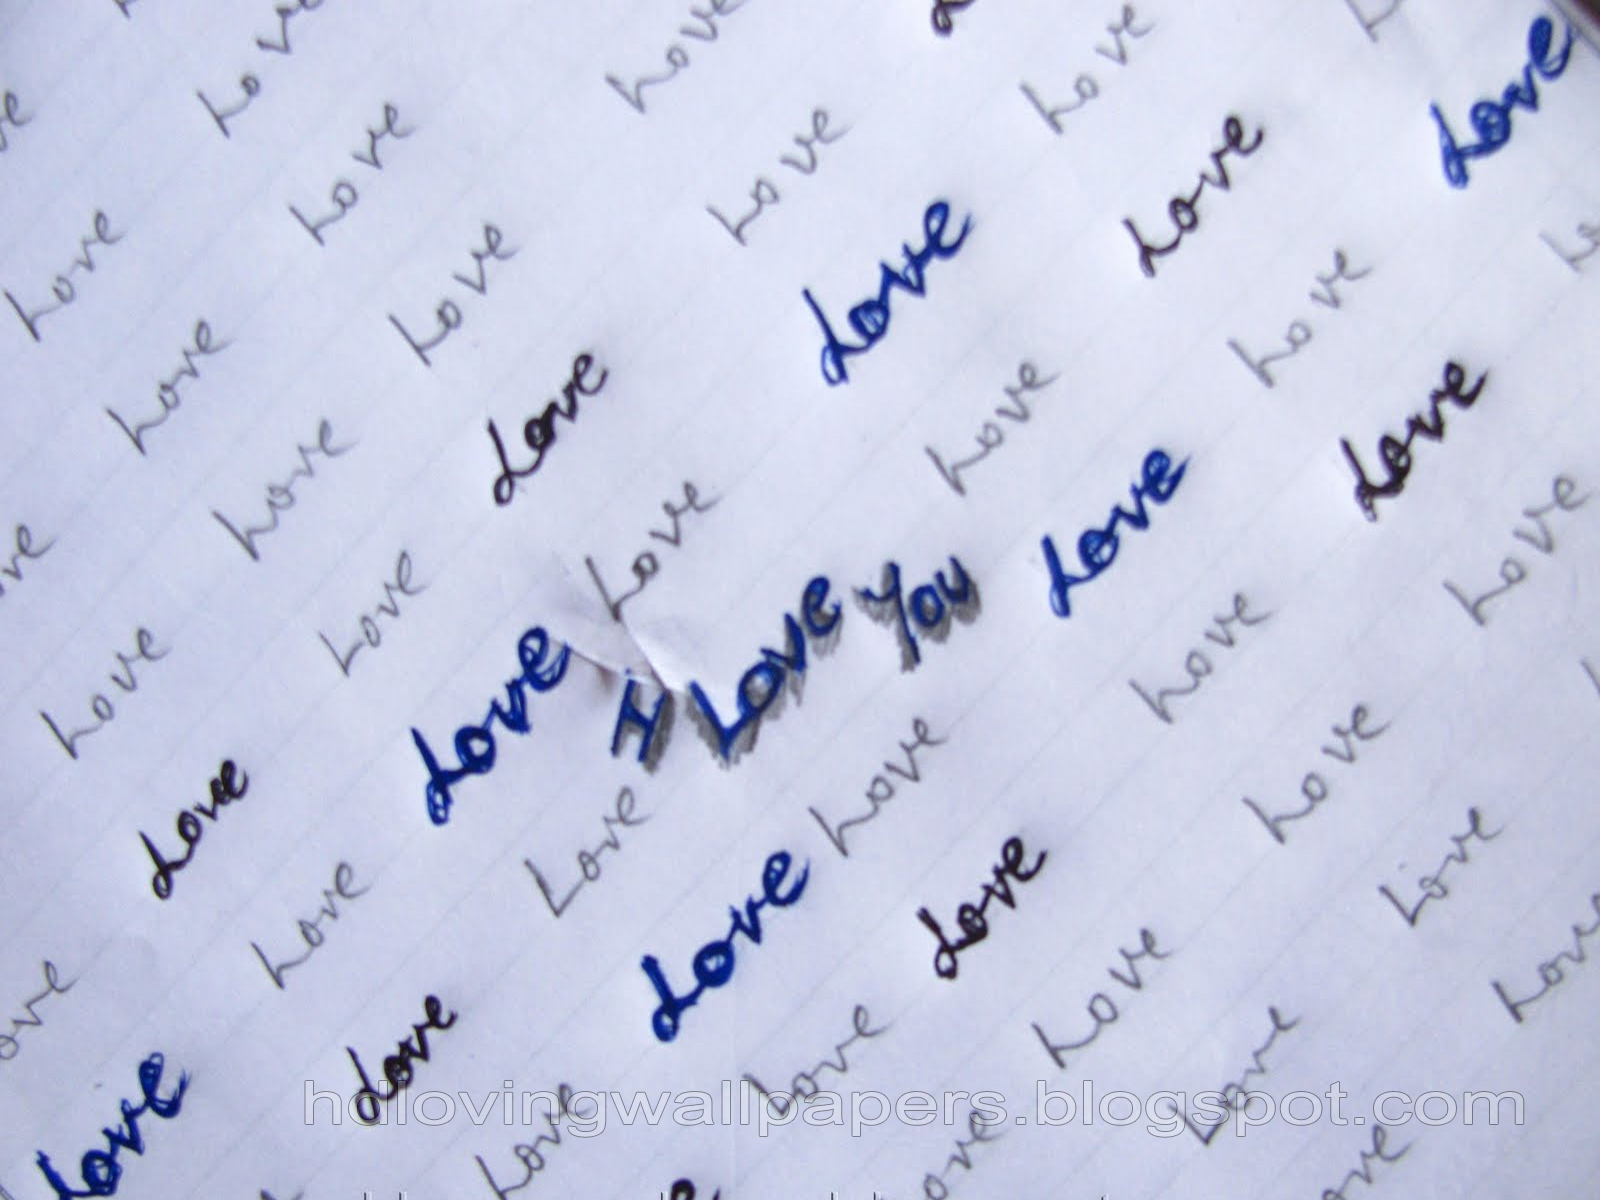 Love Wallpaper Sad Quote - Sad Love Wallpapers And Quotes , HD Wallpaper & Backgrounds